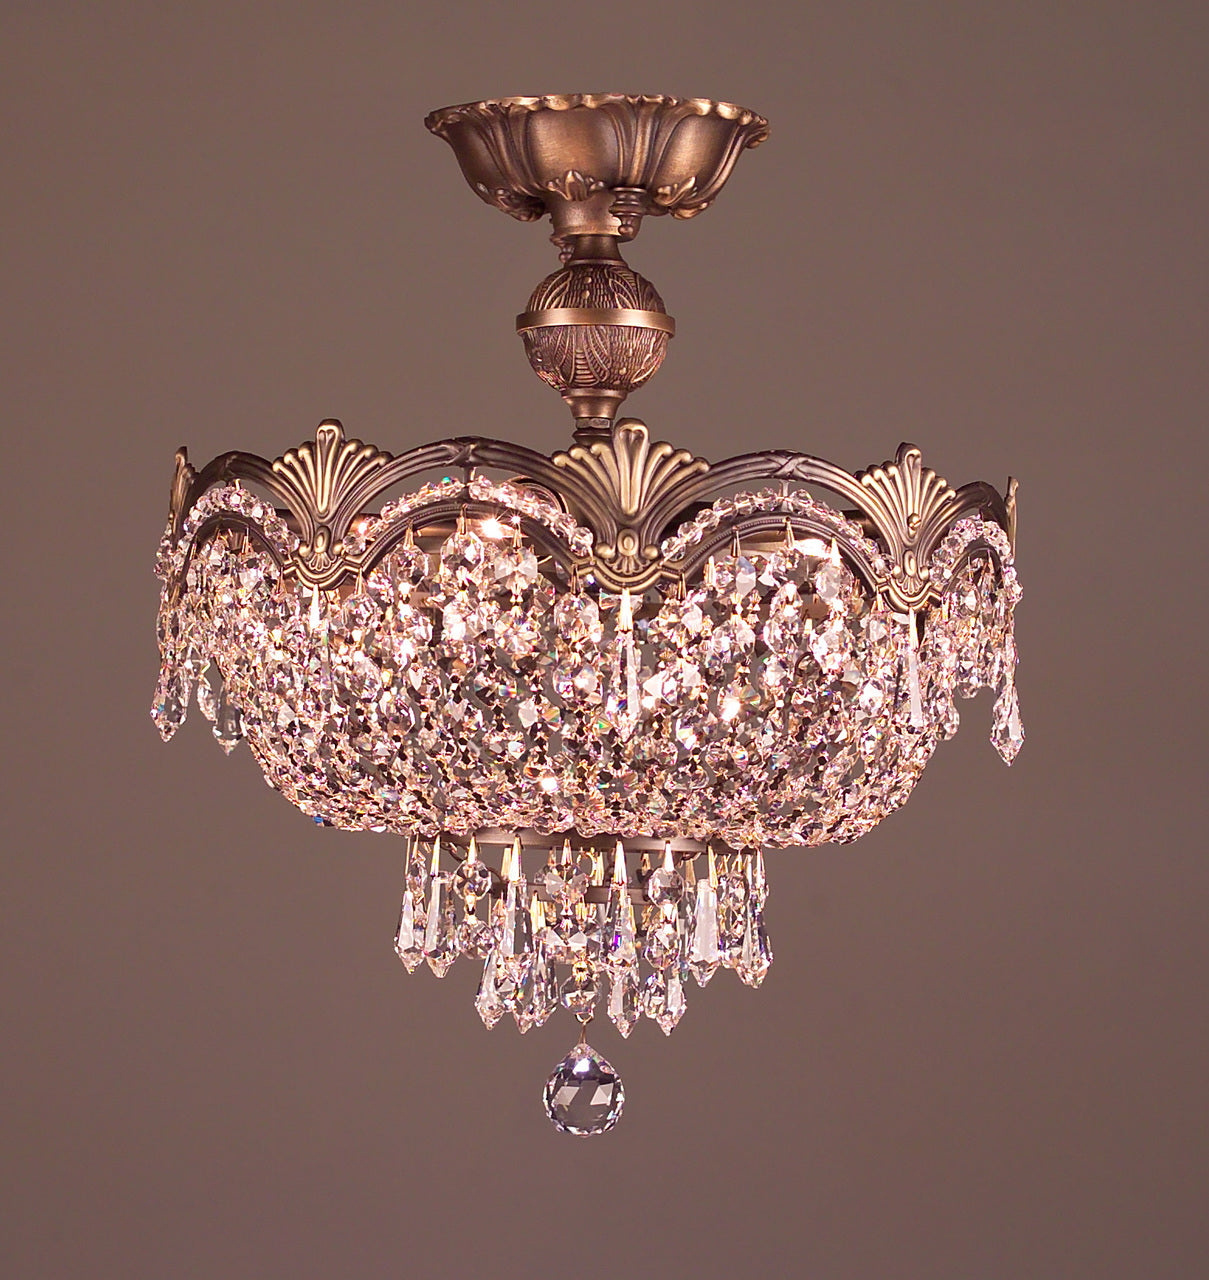 Classic Lighting 1856 RB CGT Regency II Crystal Flushmount in Roman Bronze (Imported from Spain)